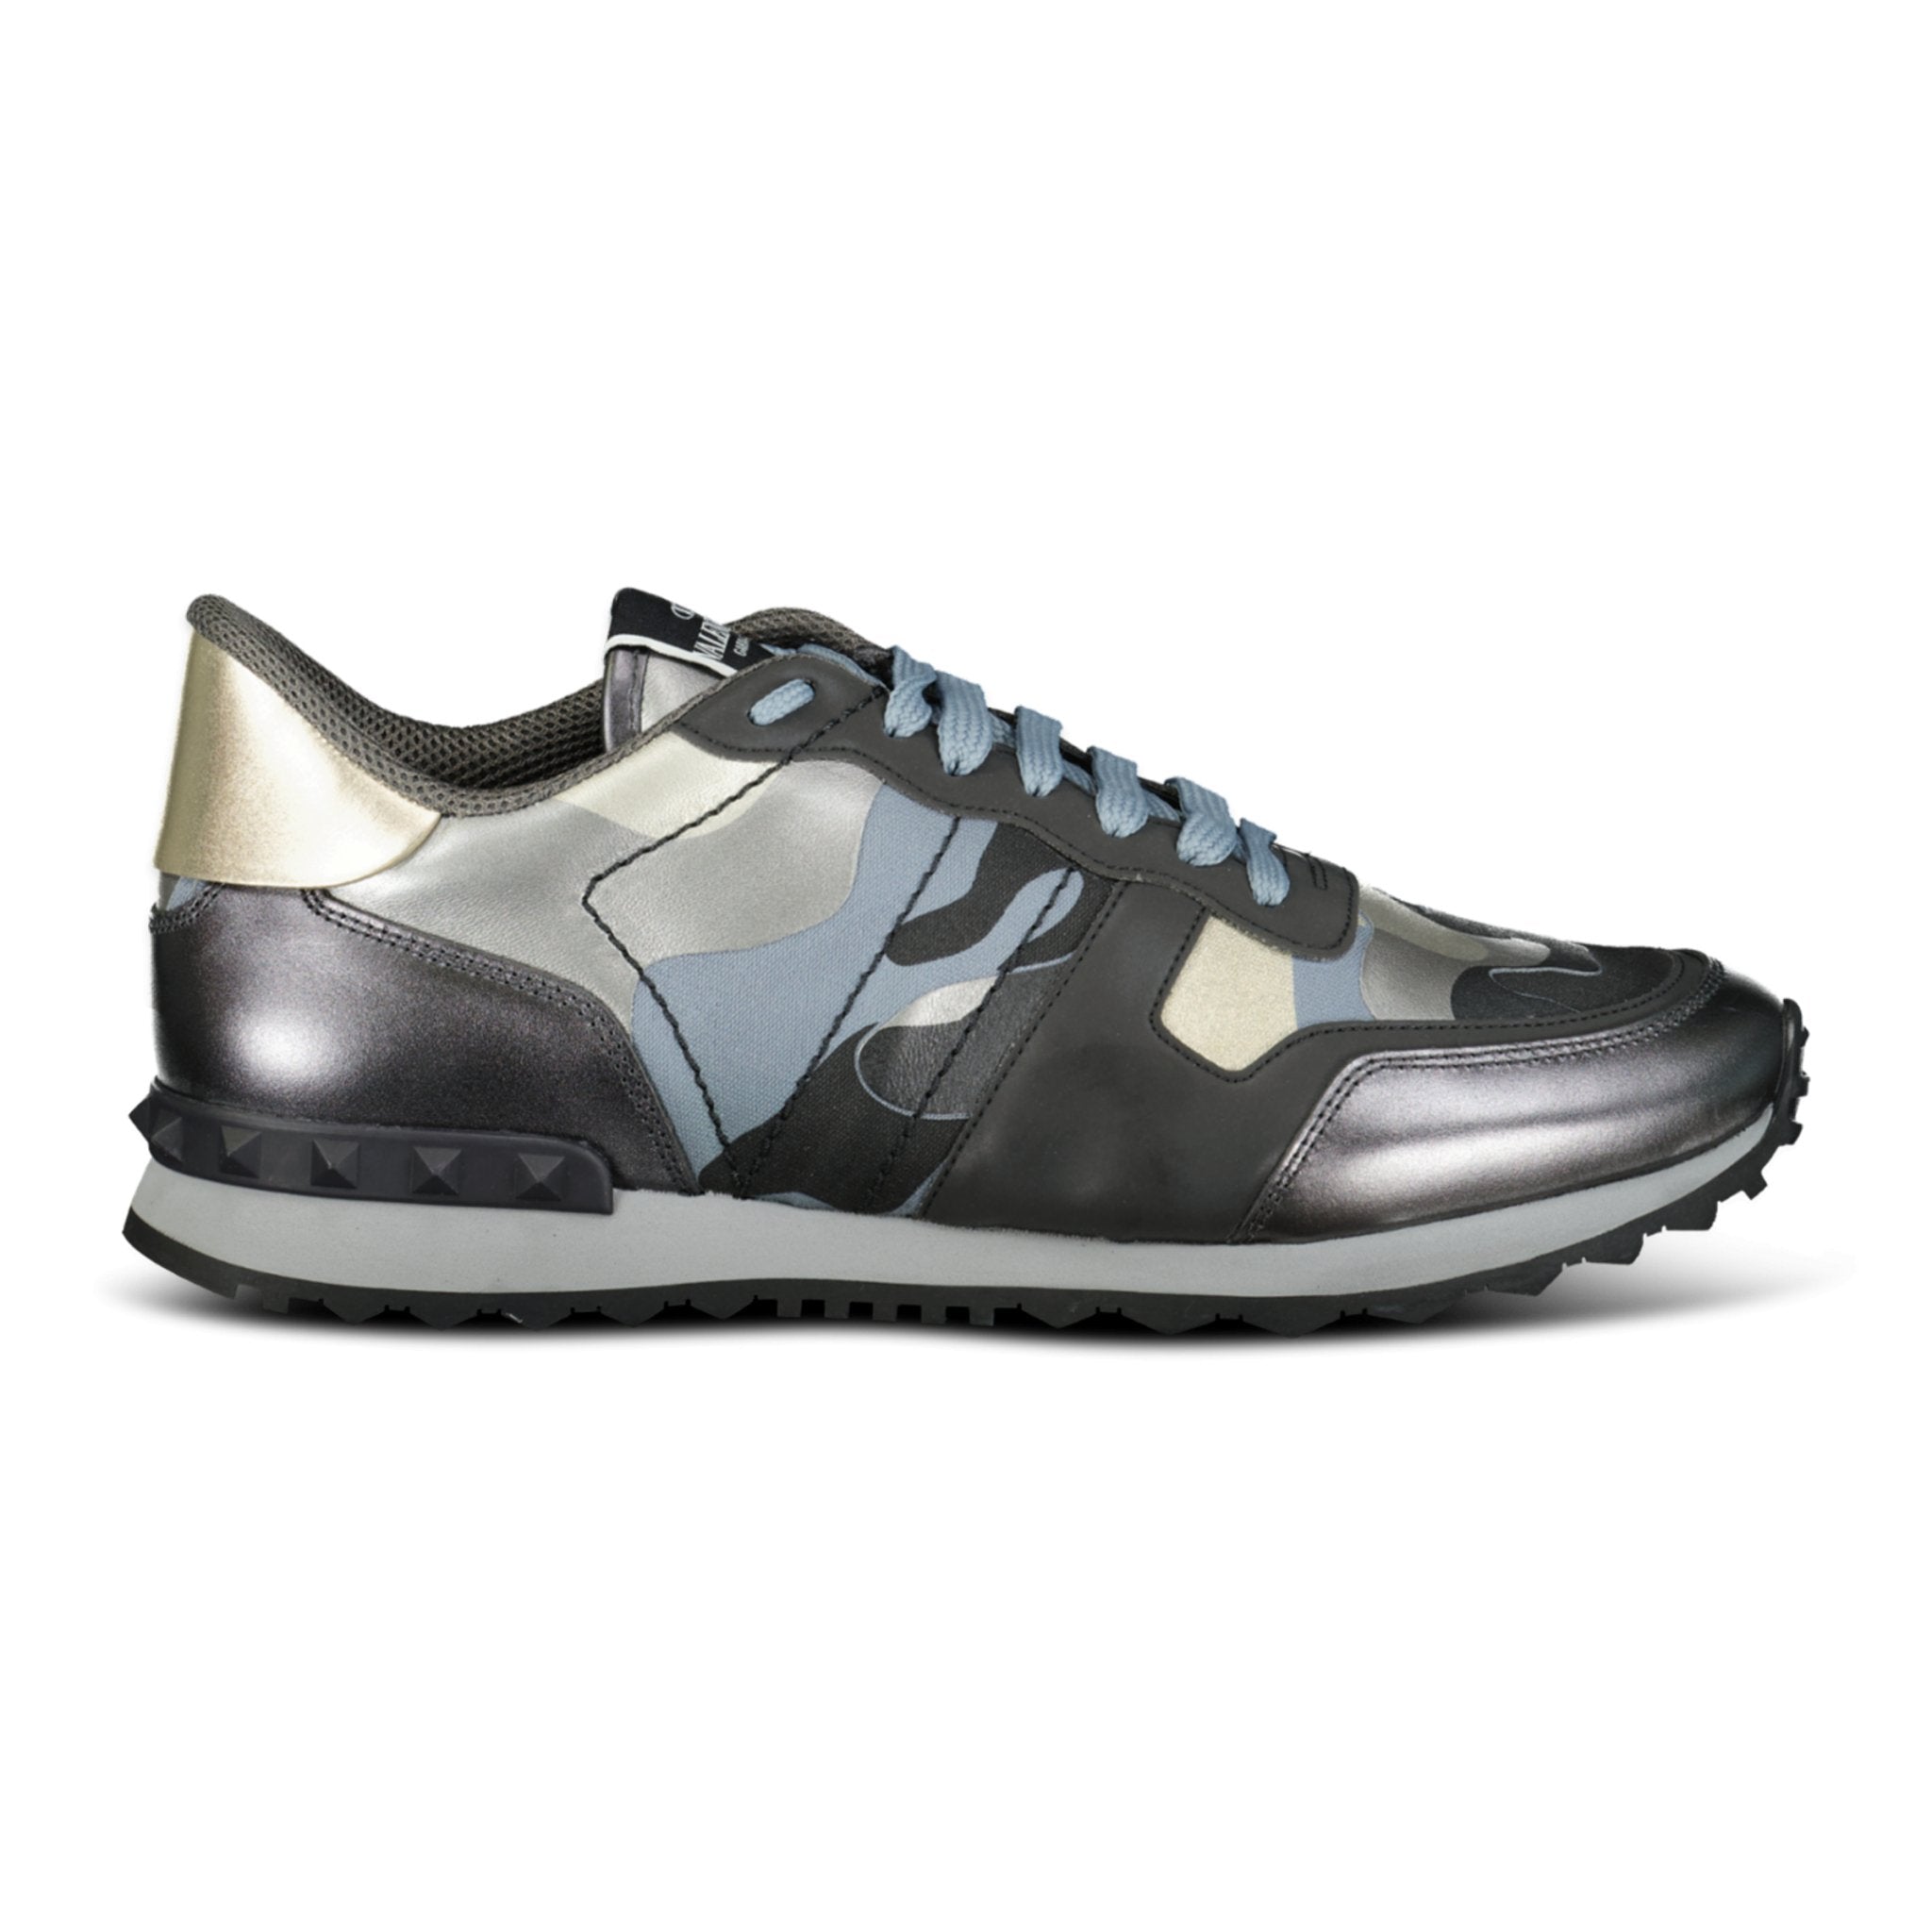 Valentino Black & Silver Rockrunner Trainers